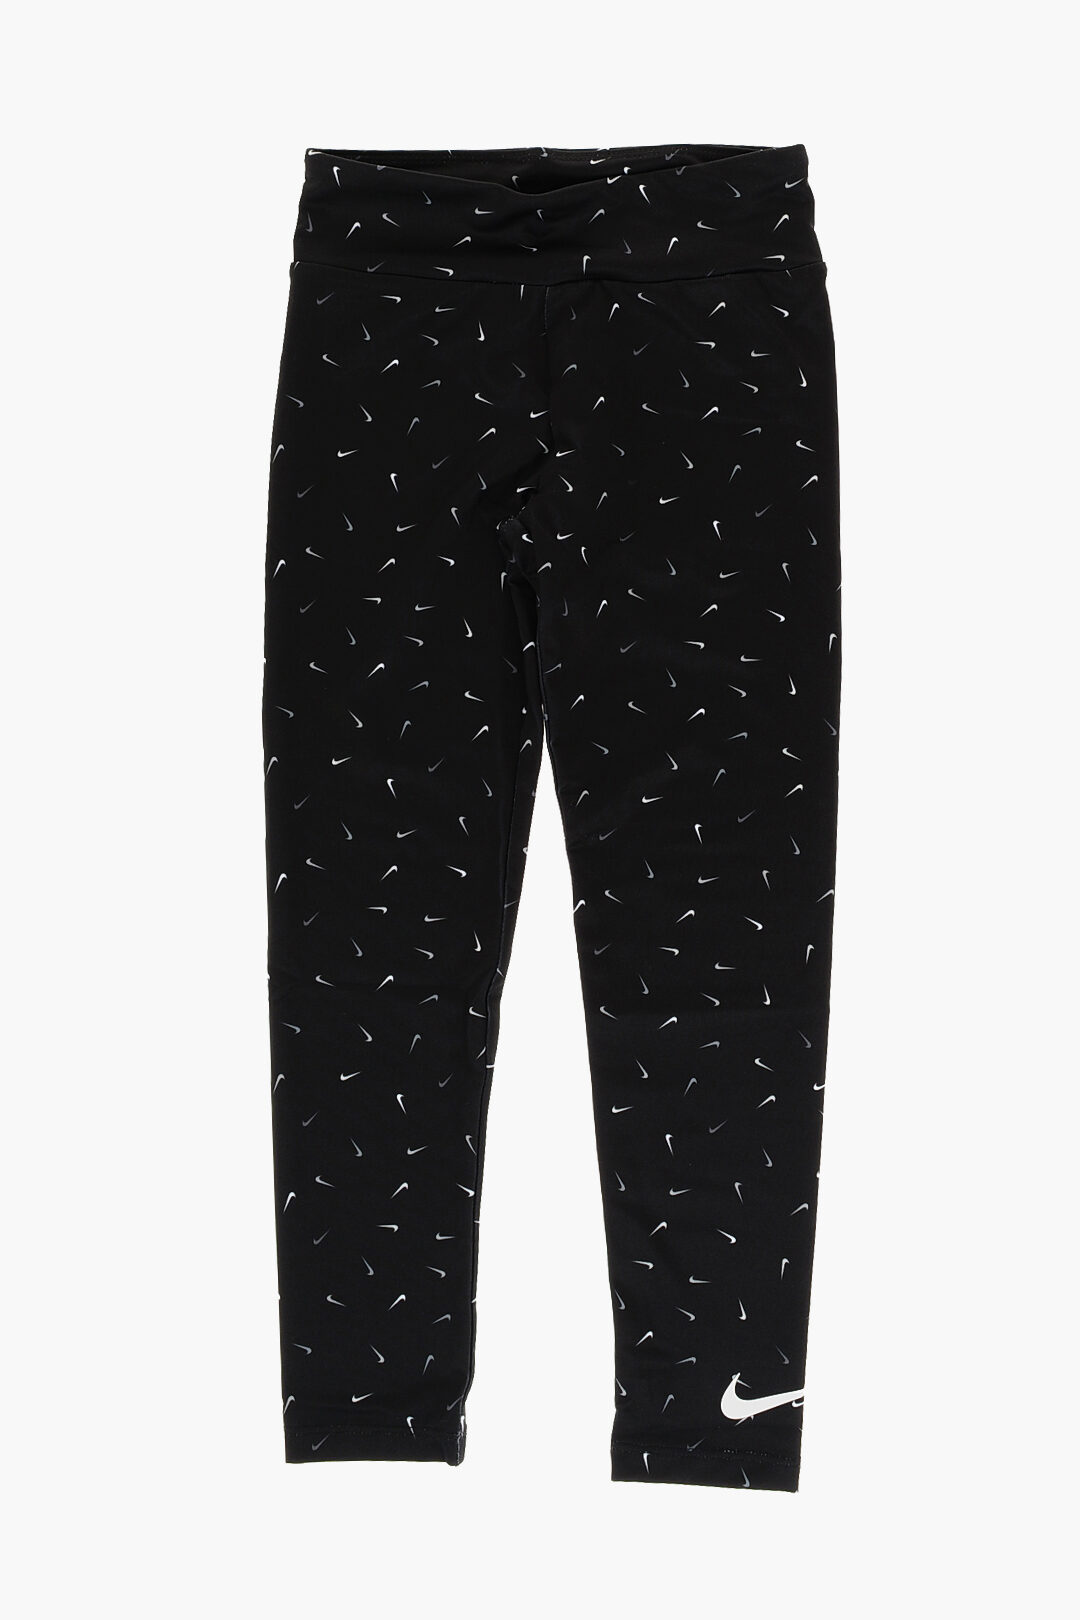 Converse ALL STAR CHUCK TAYLOR Printed Leggings women - Glamood Outlet